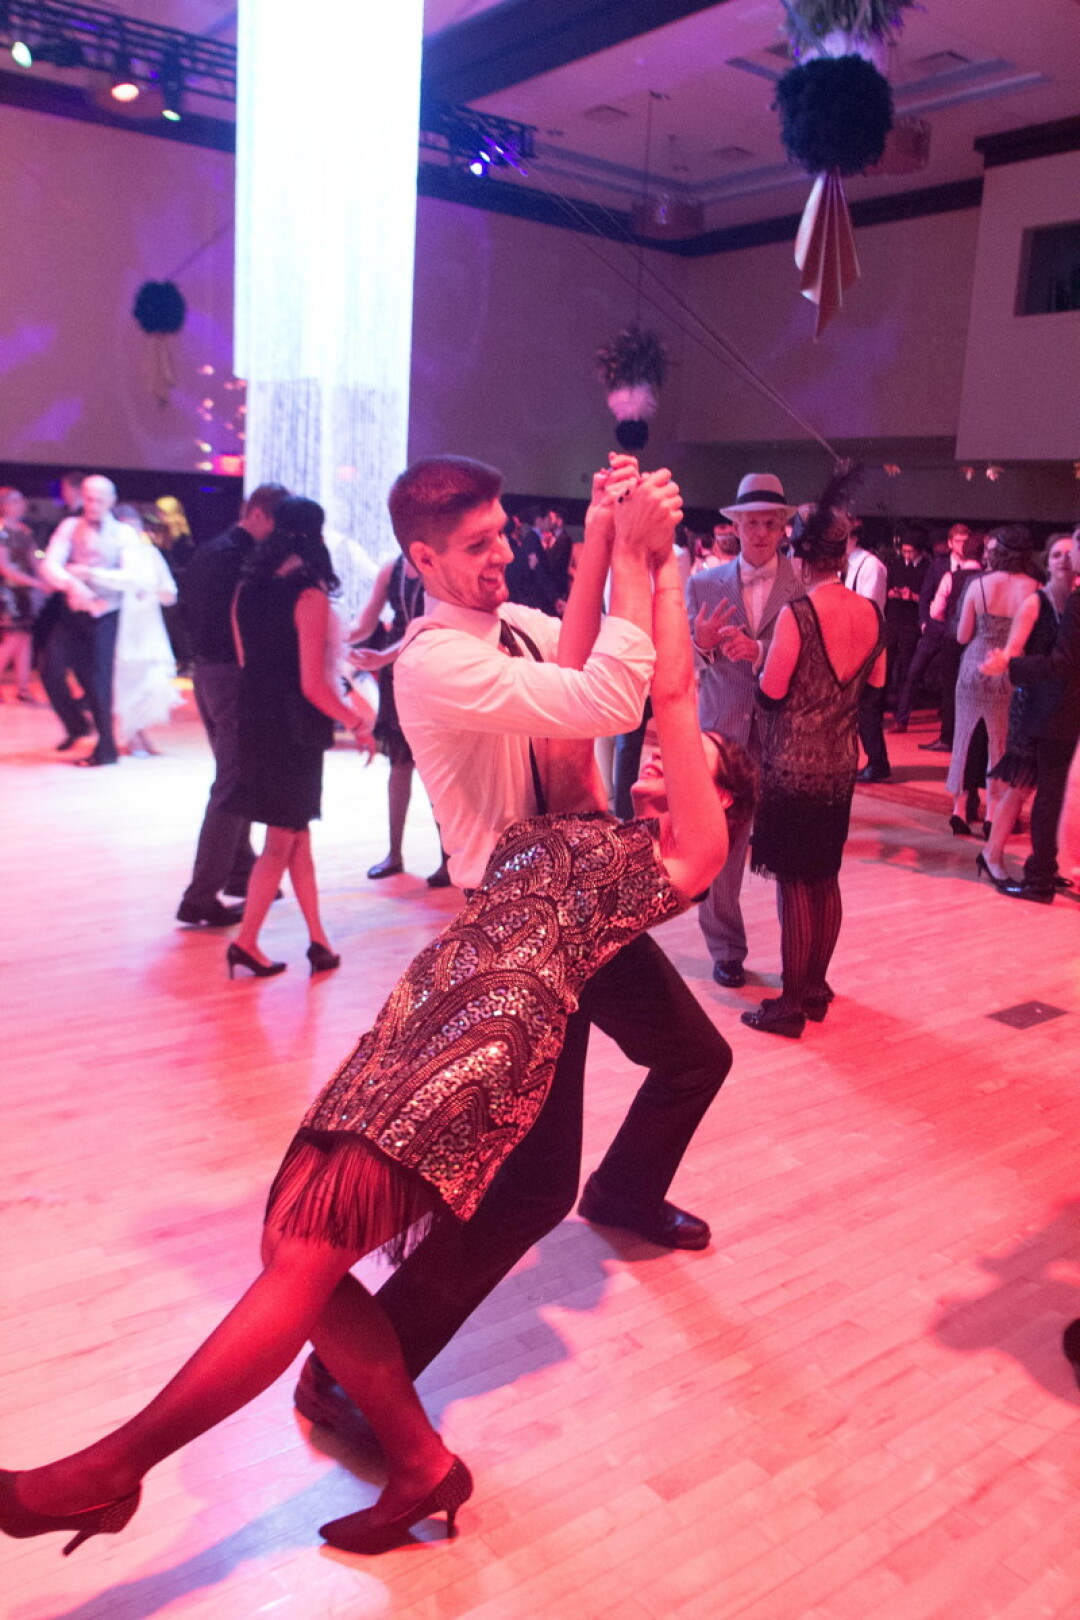 WHAT A DIP. On Friday, Nov. 10, Eau Claire Jazz Inc. (in partnership with UW-Eau Claire) presented the Fourth Annual Gatsby’s Gala on campus in the Davies Center. 